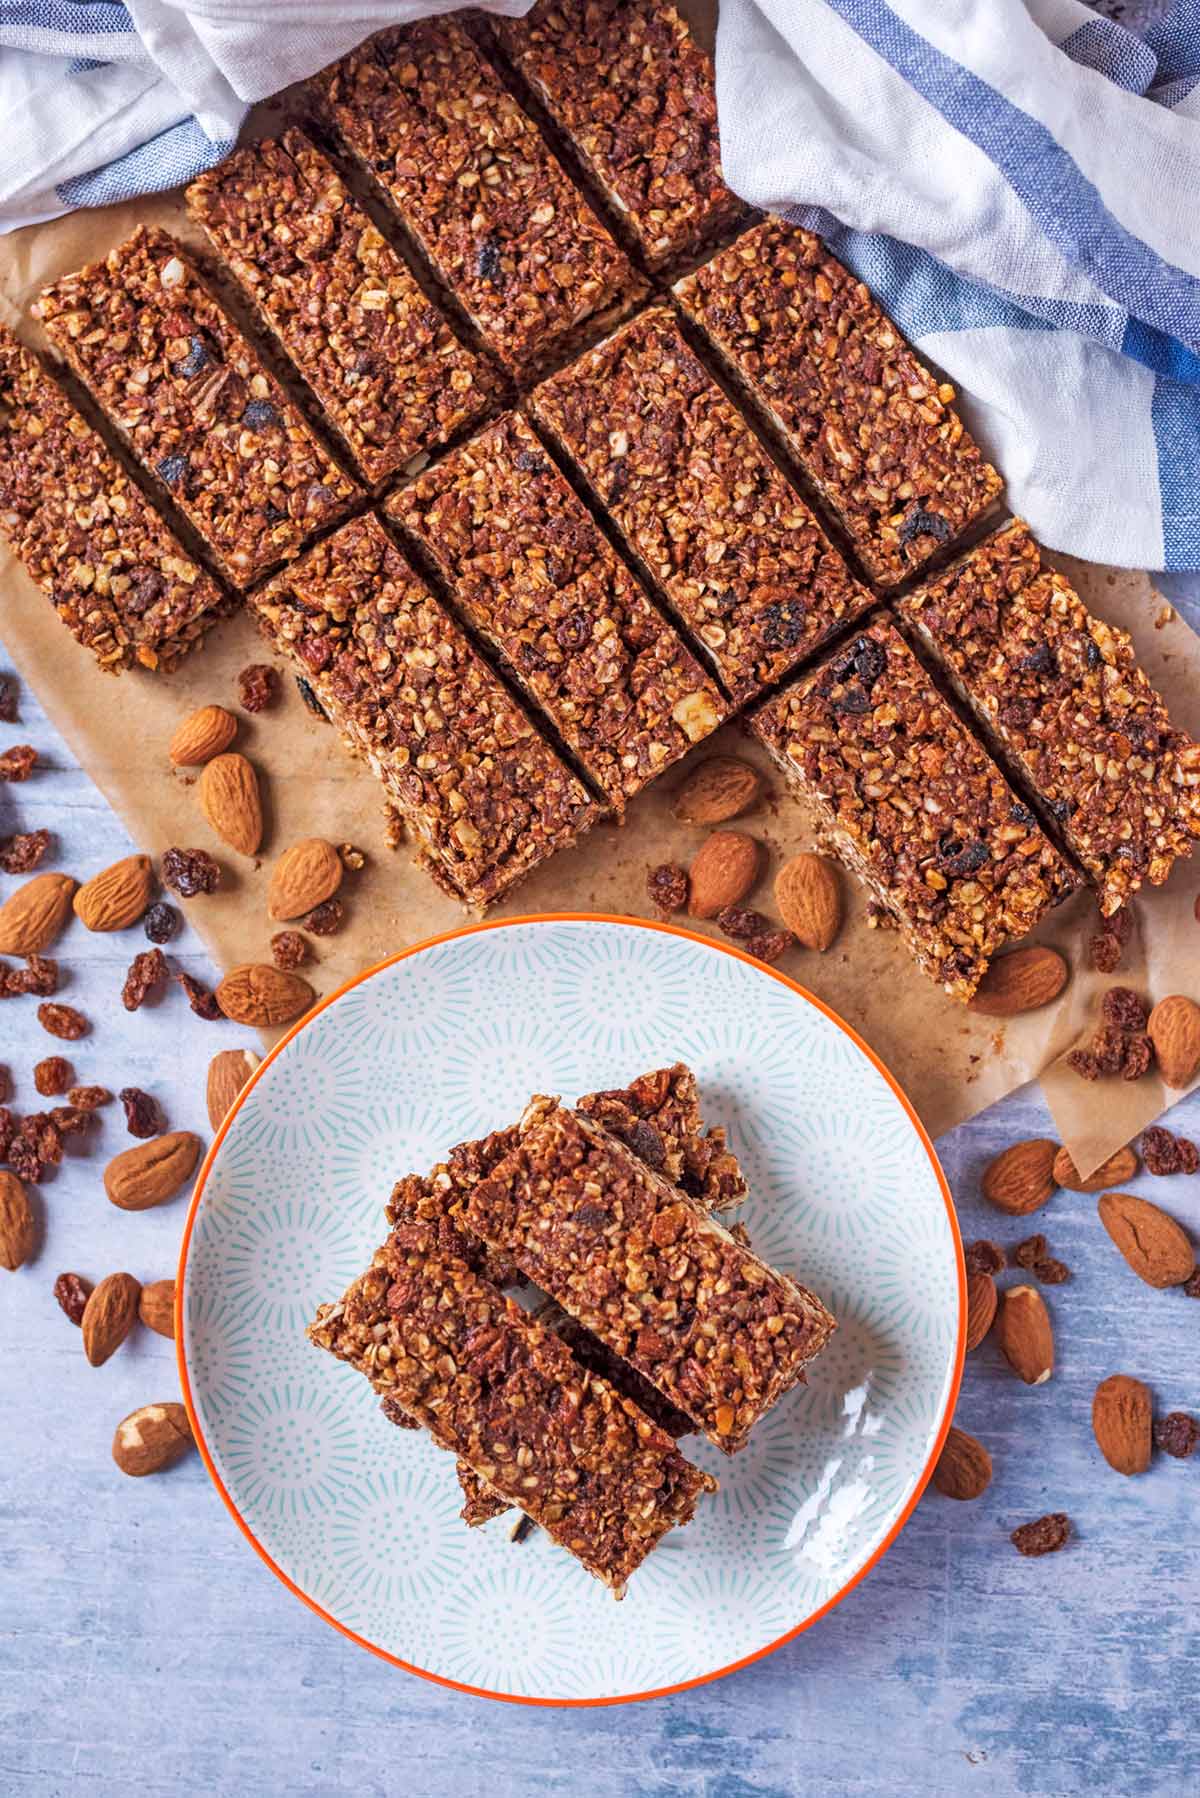 Rows of granola bars next to a plate with more bars on it.